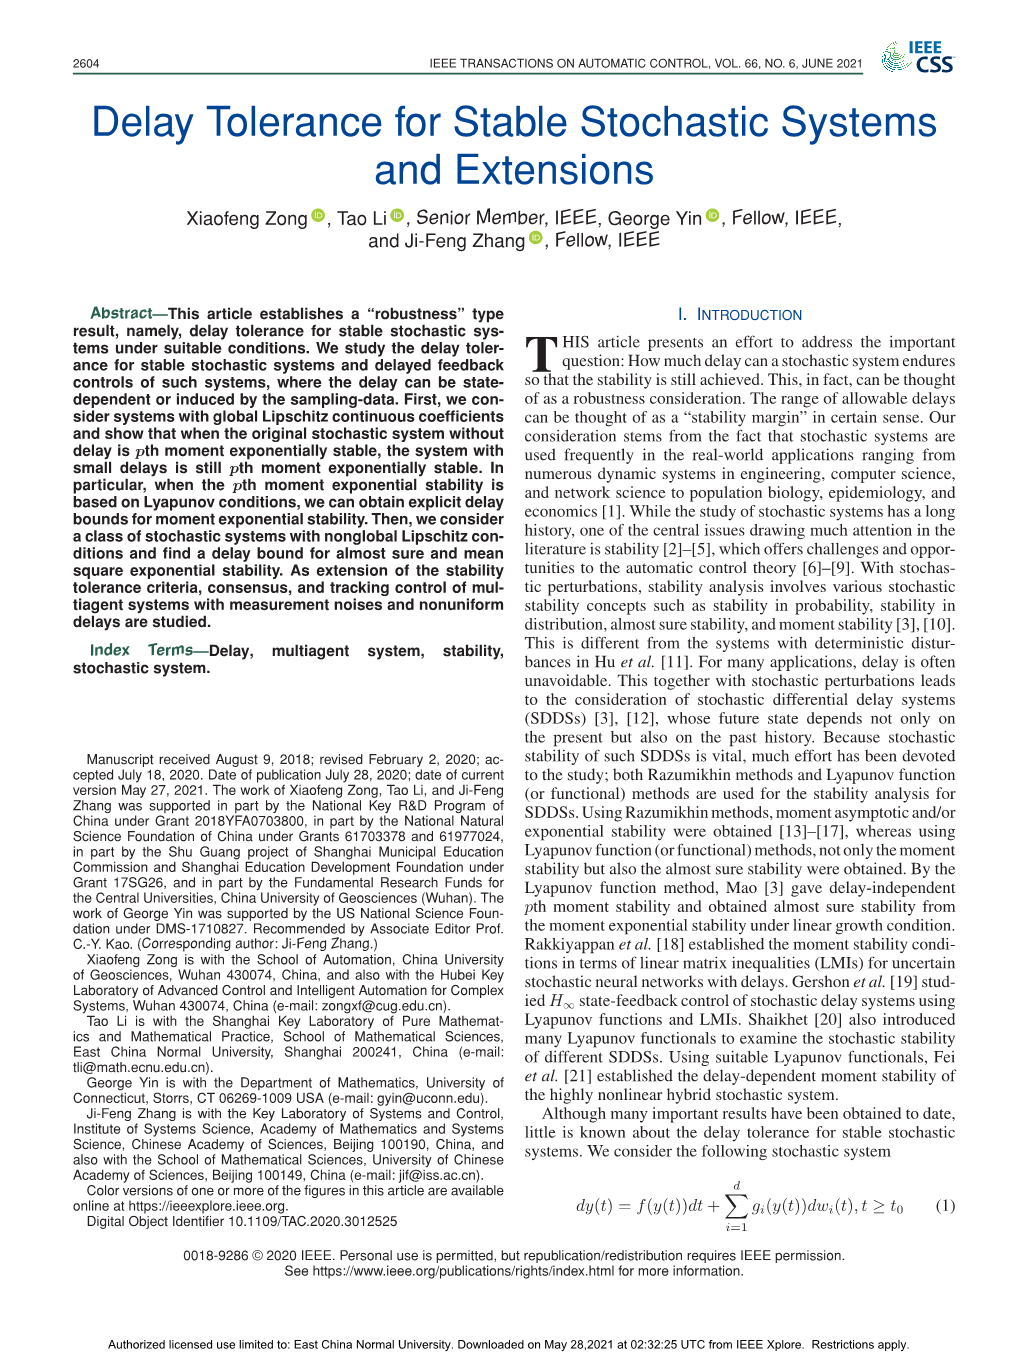 Delay Tolerance for Stable Stochastic Systems and Extensions Xiaofeng Zong , Tao Li , Senior Member, IEEE, George Yin , Fellow, IEEE, and Ji-Feng Zhang , Fellow, IEEE